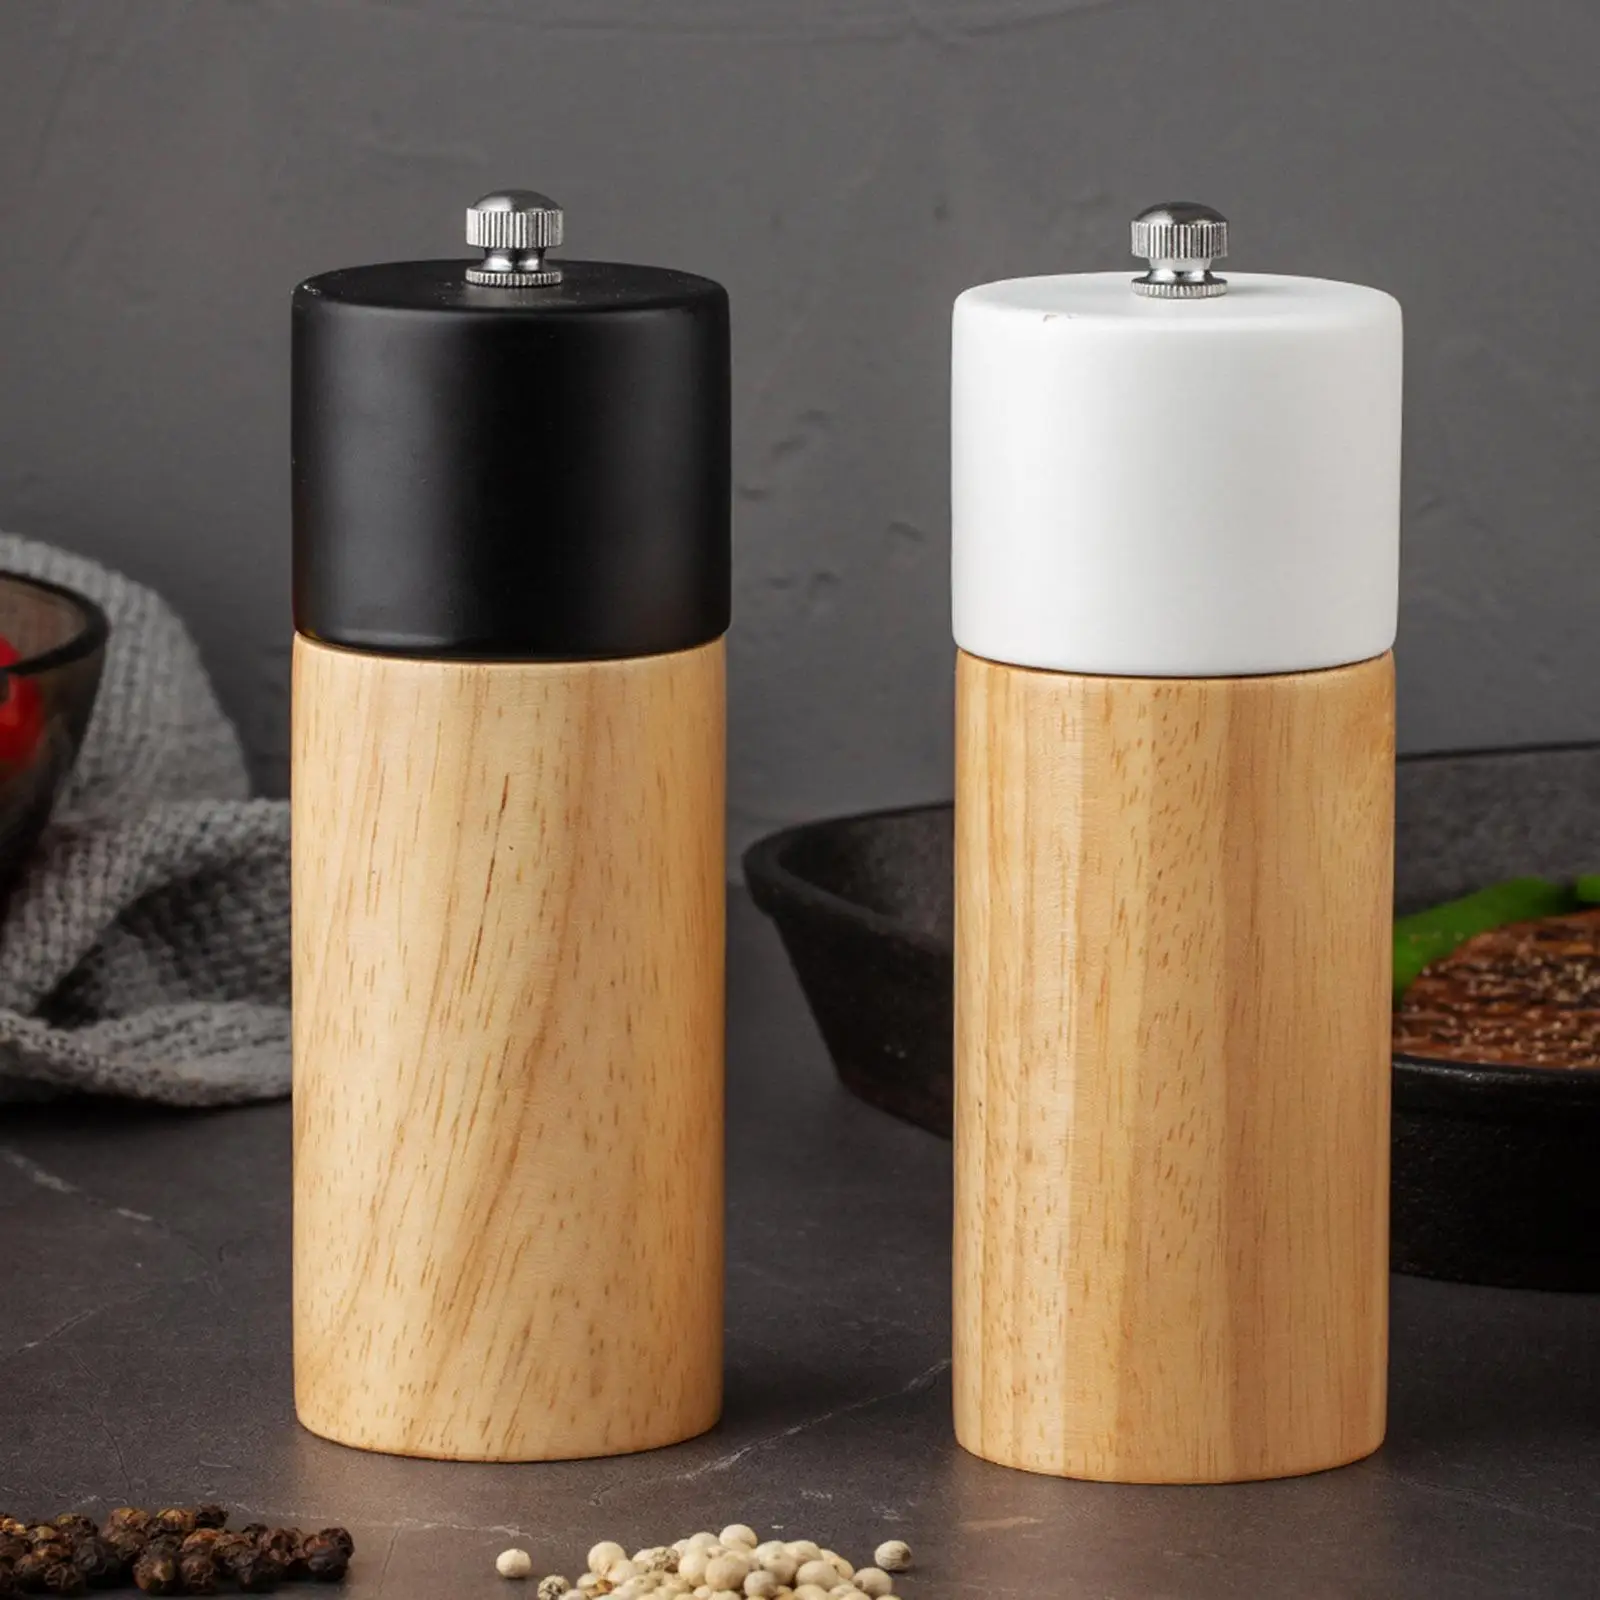 Manual Pepper and Salt Mill 1x with Spice Easy Refillable Salt and Pepper for Kitchen Gadgets Home Picnics BBQ